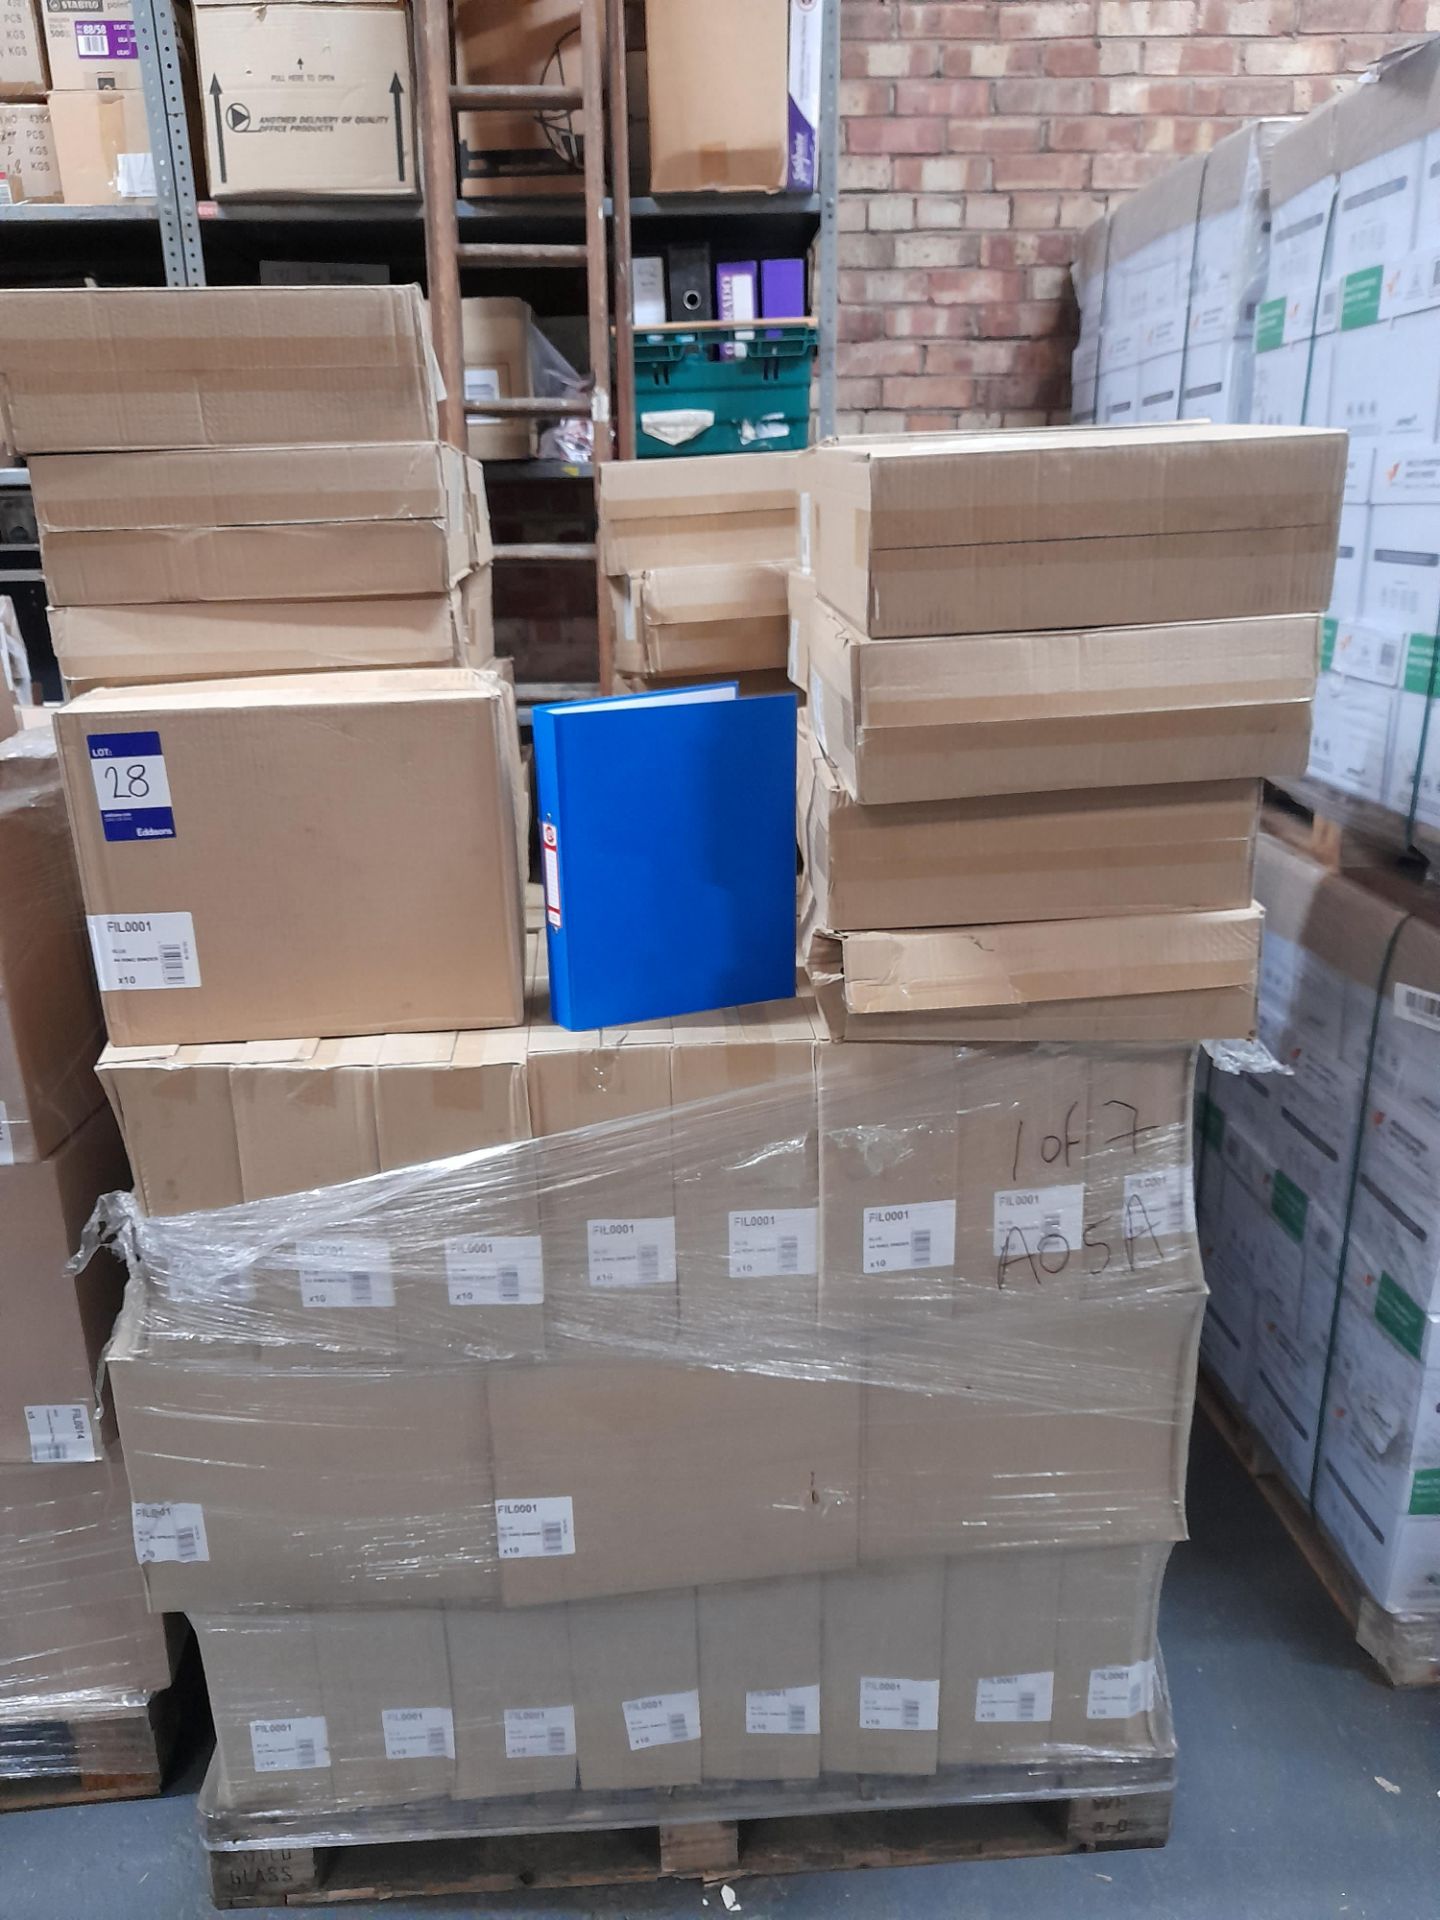 3 Pallets of approx. 200 boxes of blue A4 ring binders, each box contains 10 as lotted per photos